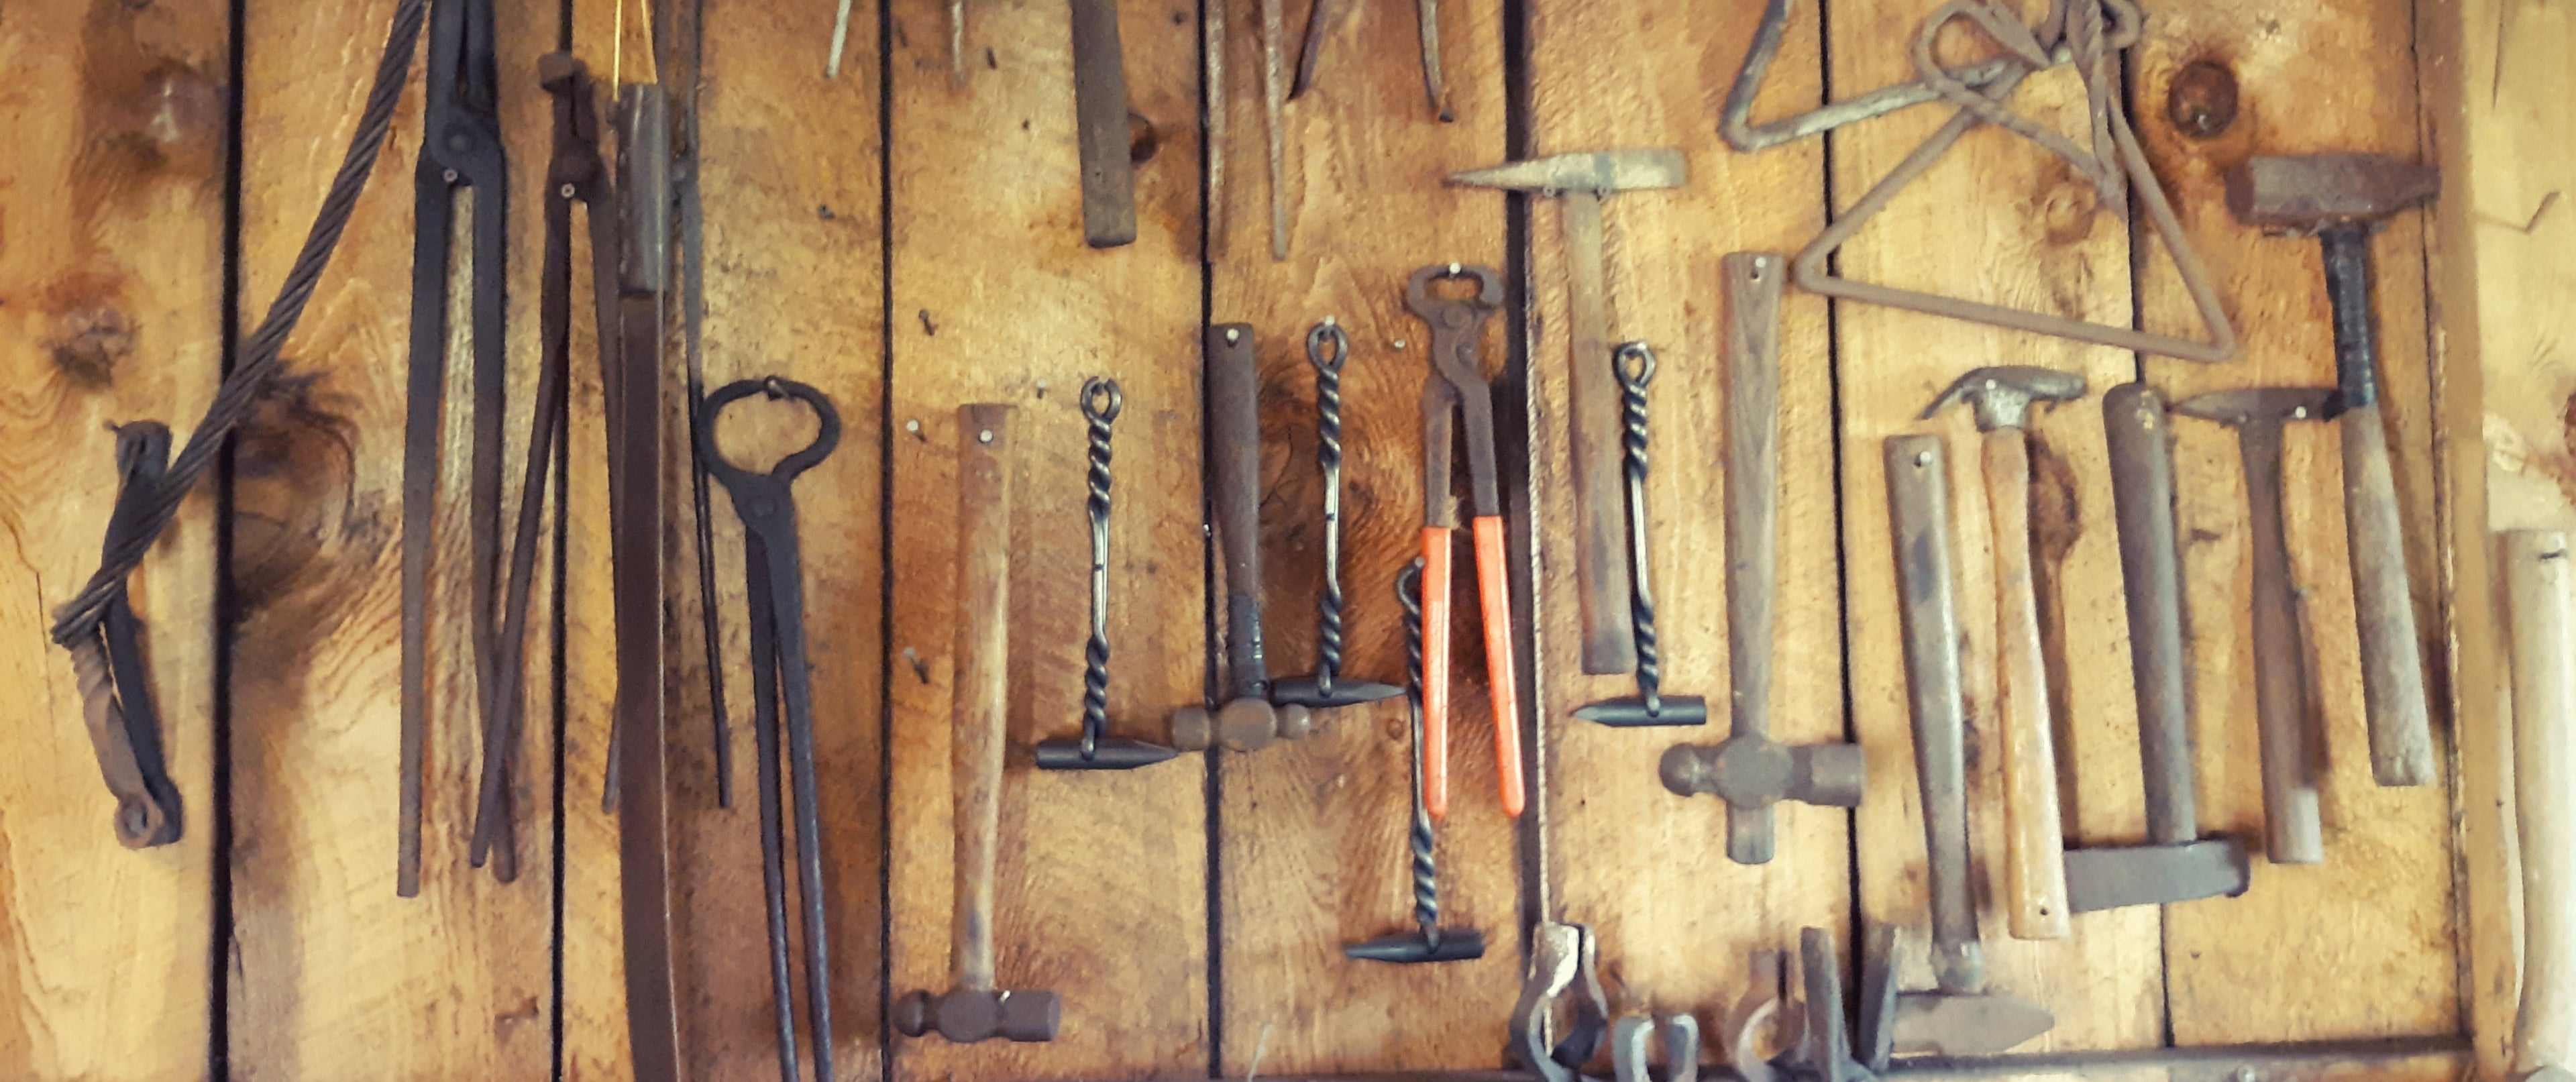 Tools used by our blacksmith in the forge.  Hammers, tongs and other tos are used to create hand forged metal work here on our family farm.